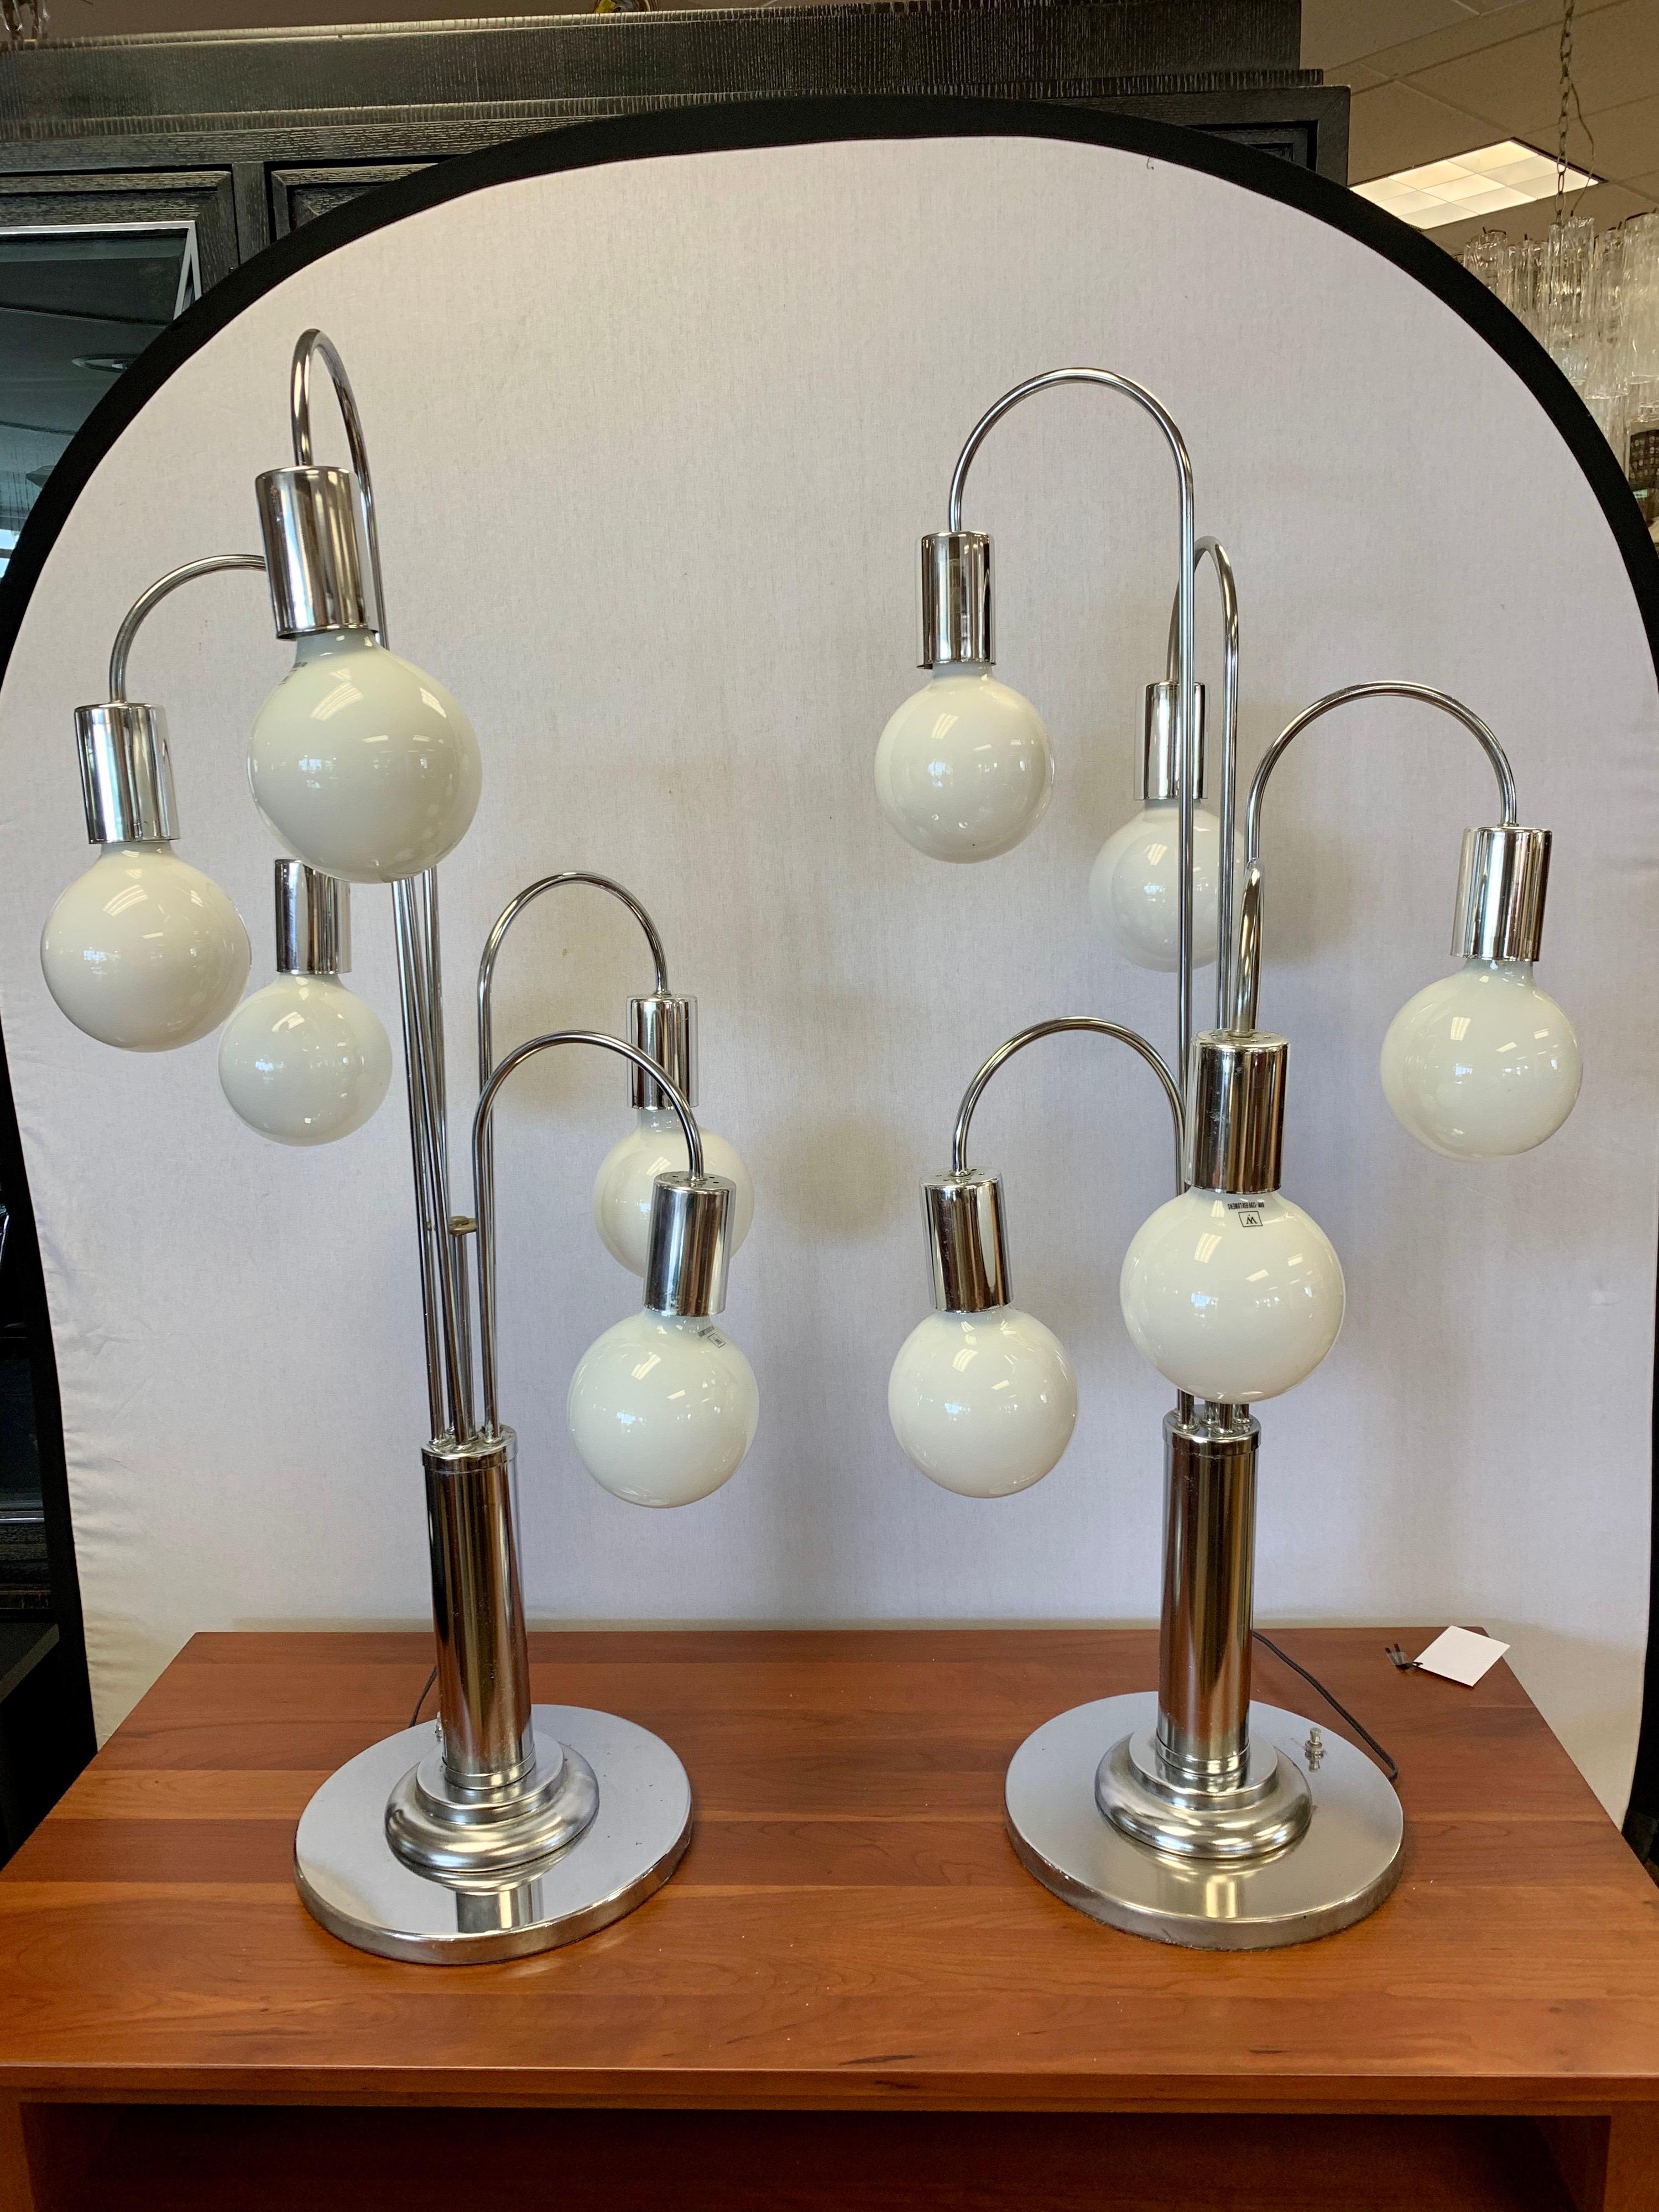 Ultra rare matching pair of Laurel Lamp Company large chrome waterfall table lamps. There are five lights and these pieces are made to look like cascading chandeliers. They measure forty inches tall and are nothing short of magnificent. Made and